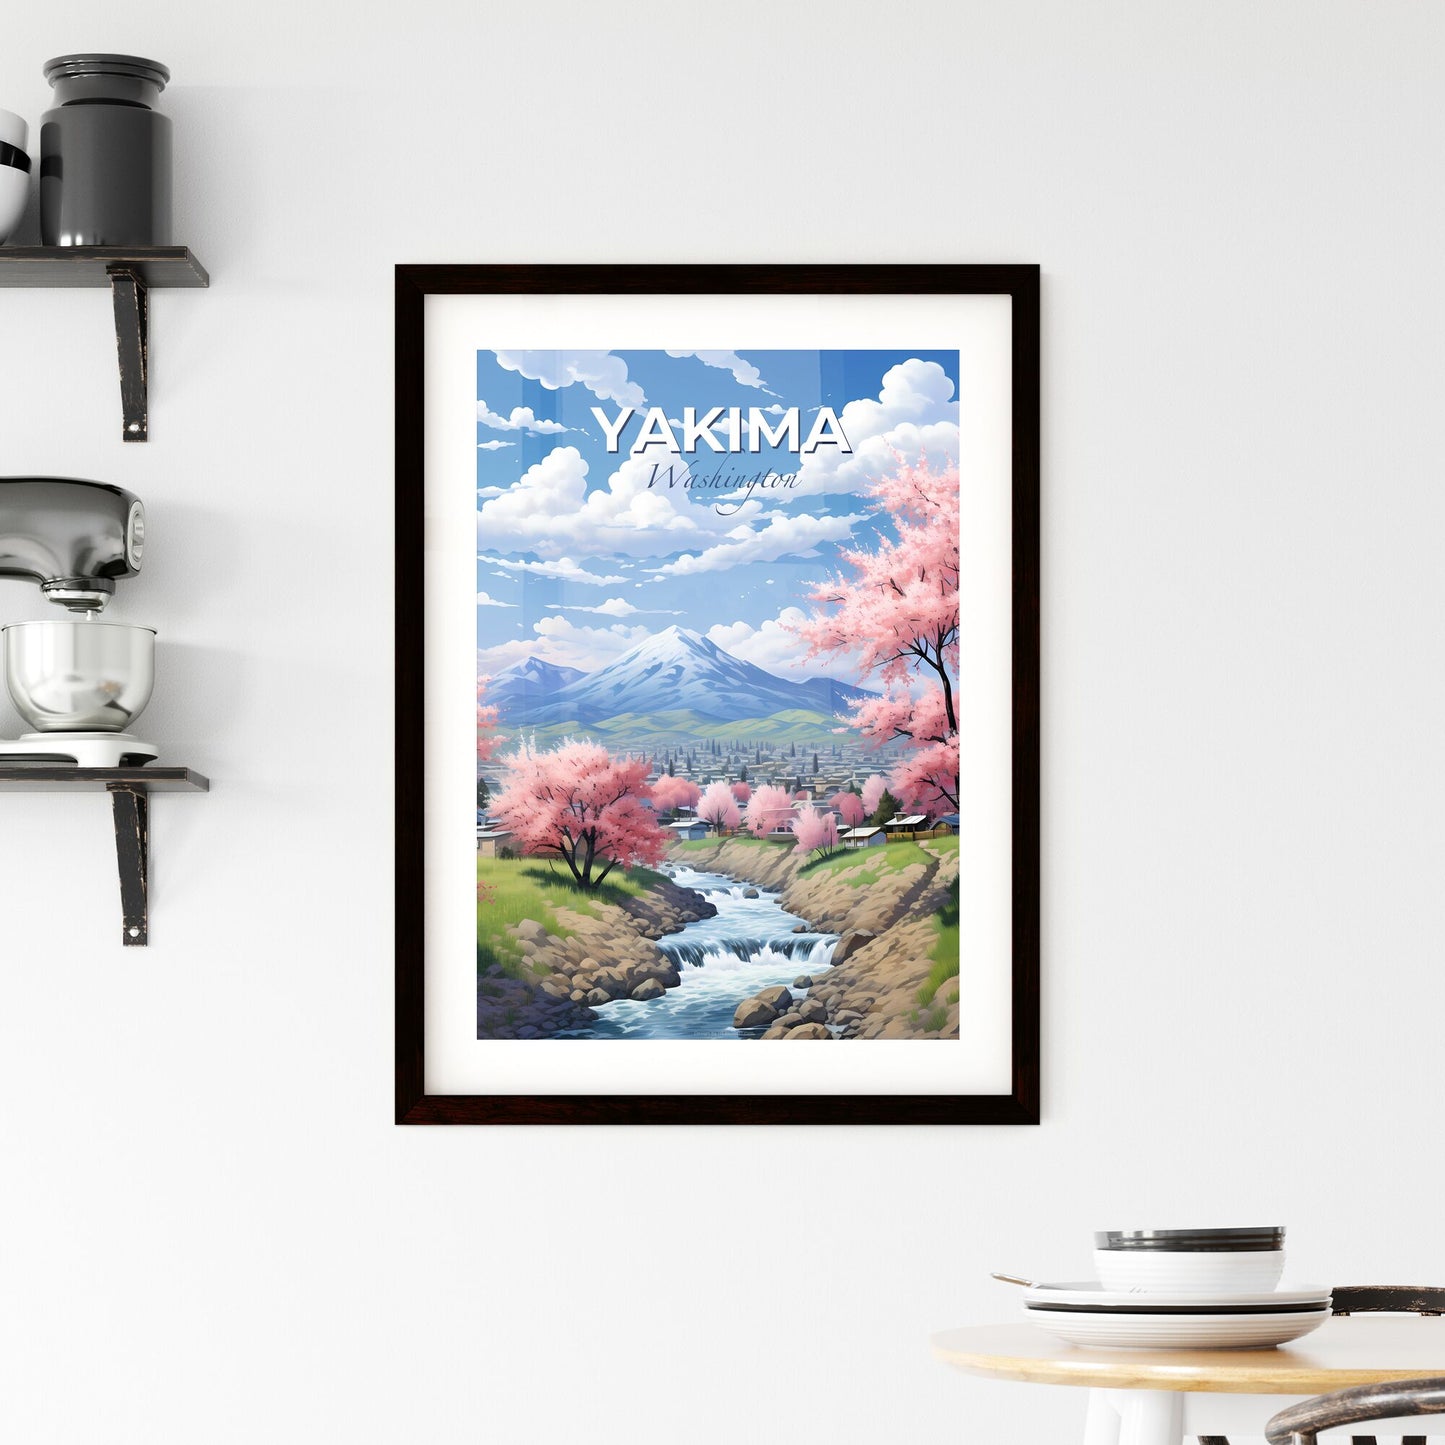 Yakima, Washington, A Poster of a river running through a town Default Title